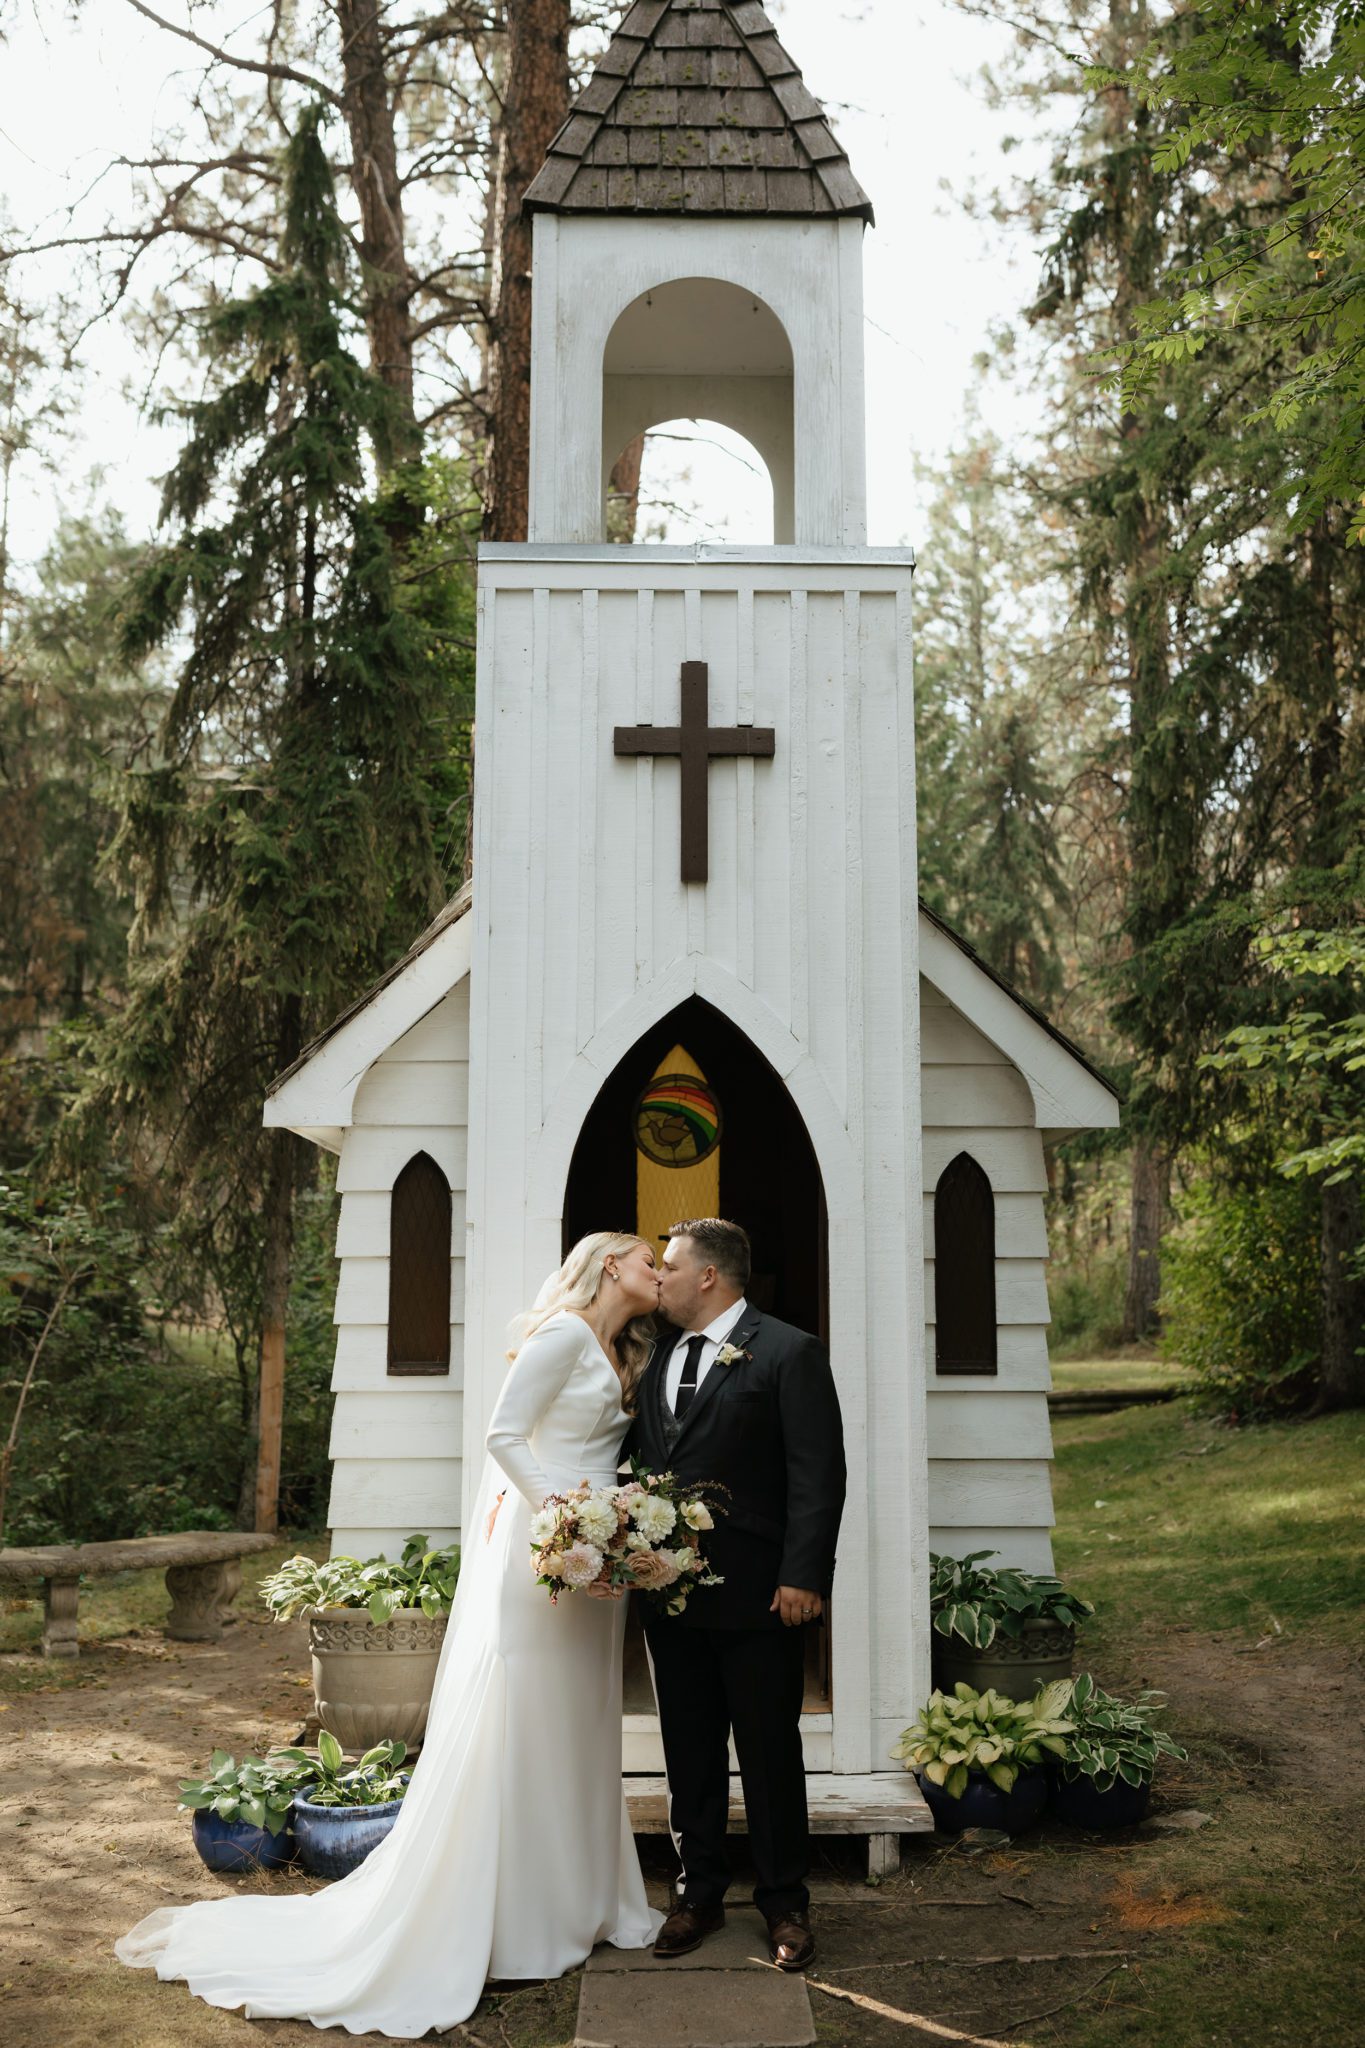 Bride and groom share a kiss in front of the tiny white chapel in Okanagan British Columbia, the heart of wine country